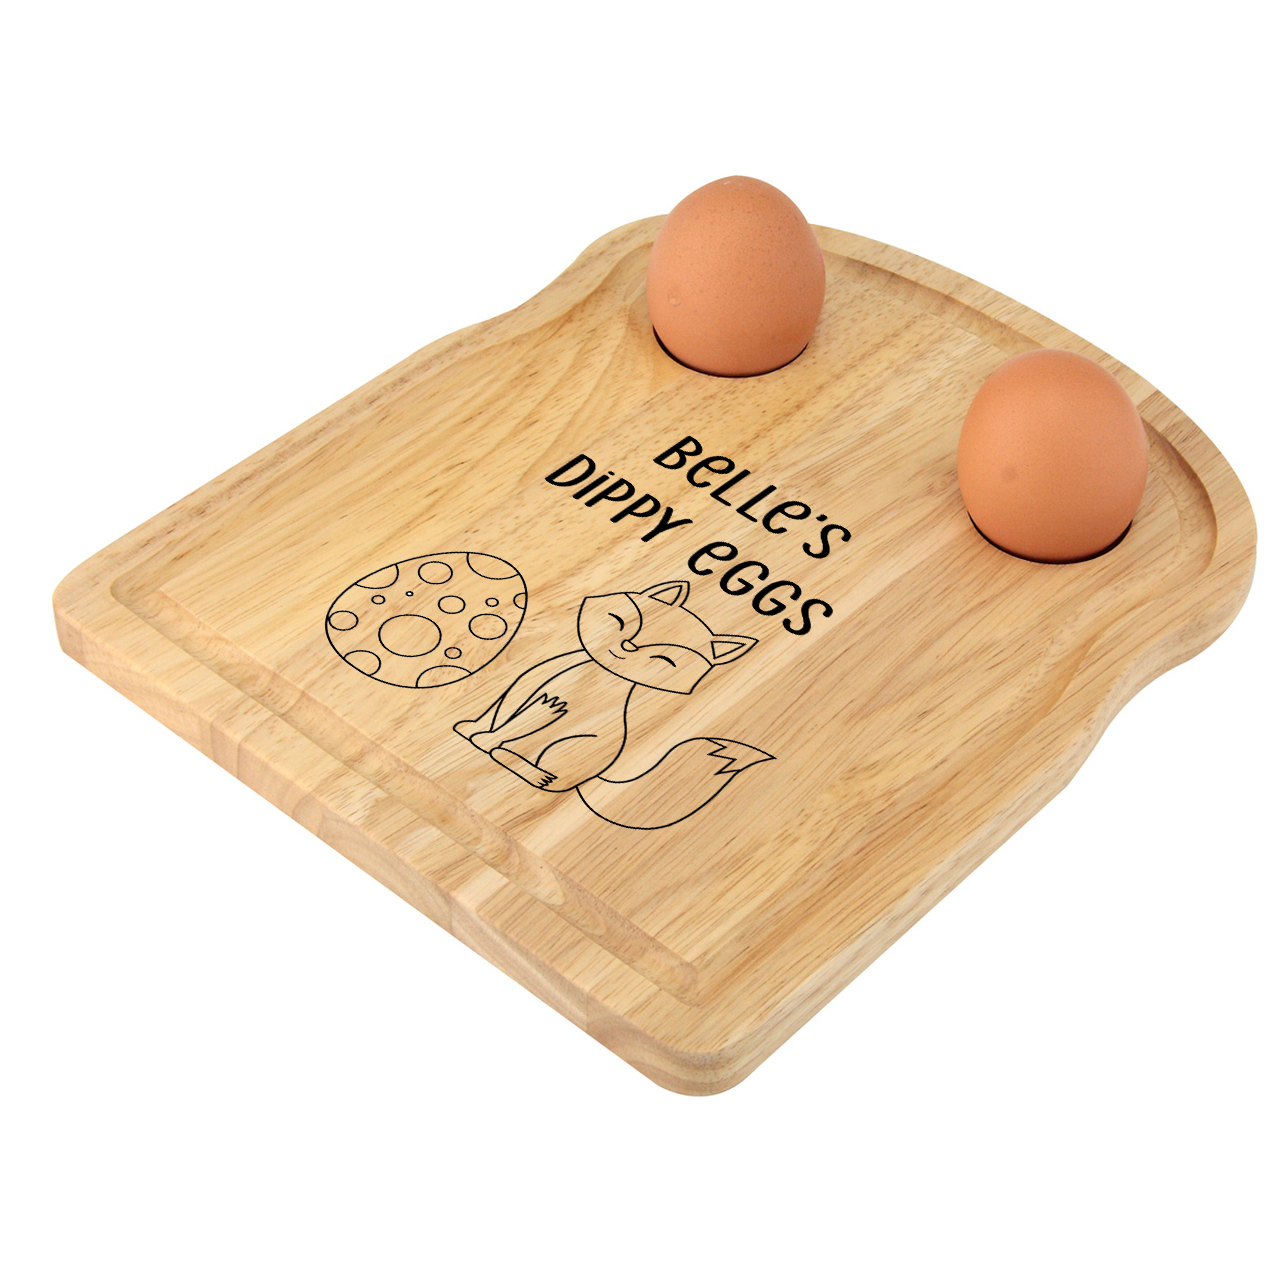 Wooden Loaf Egg Board with fox personalised